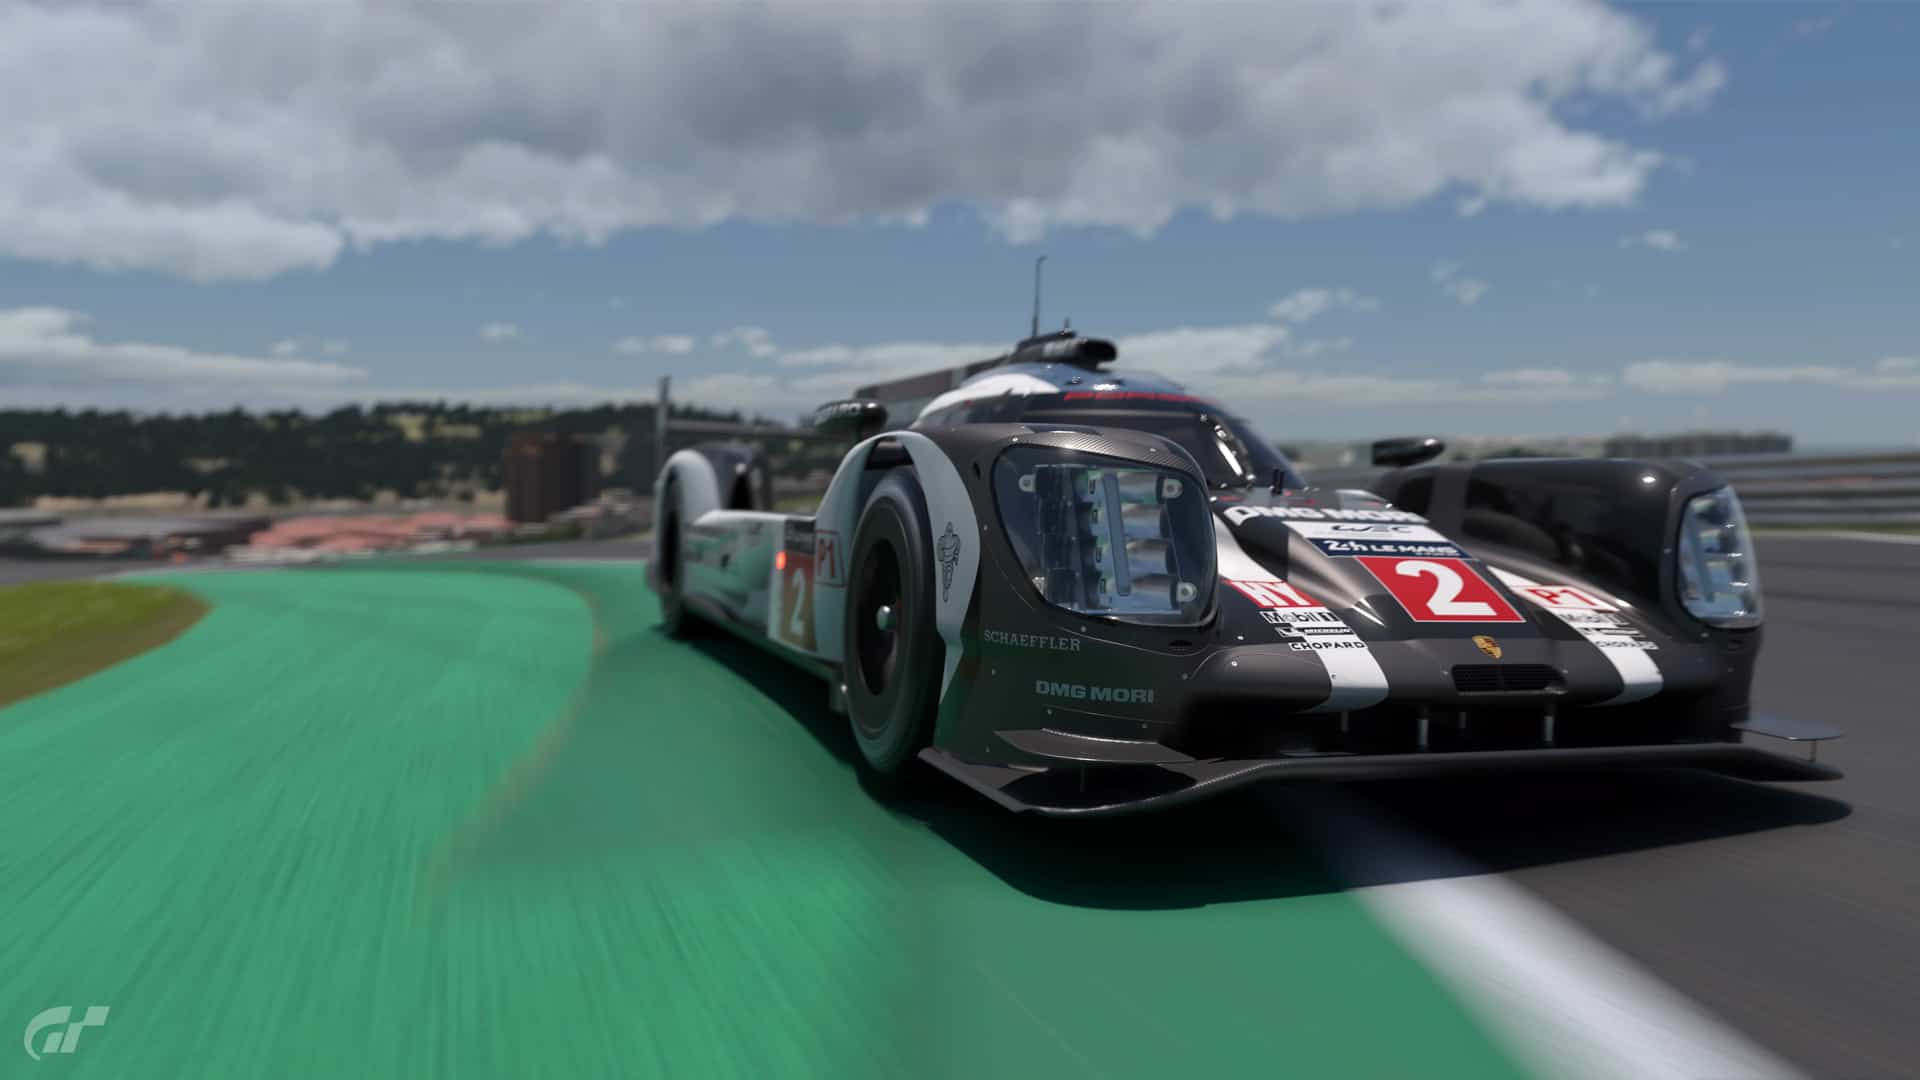 Your guide to Gran Turismo 7's Daily Races, wc 10th October - The 25 minutes of Interlagos